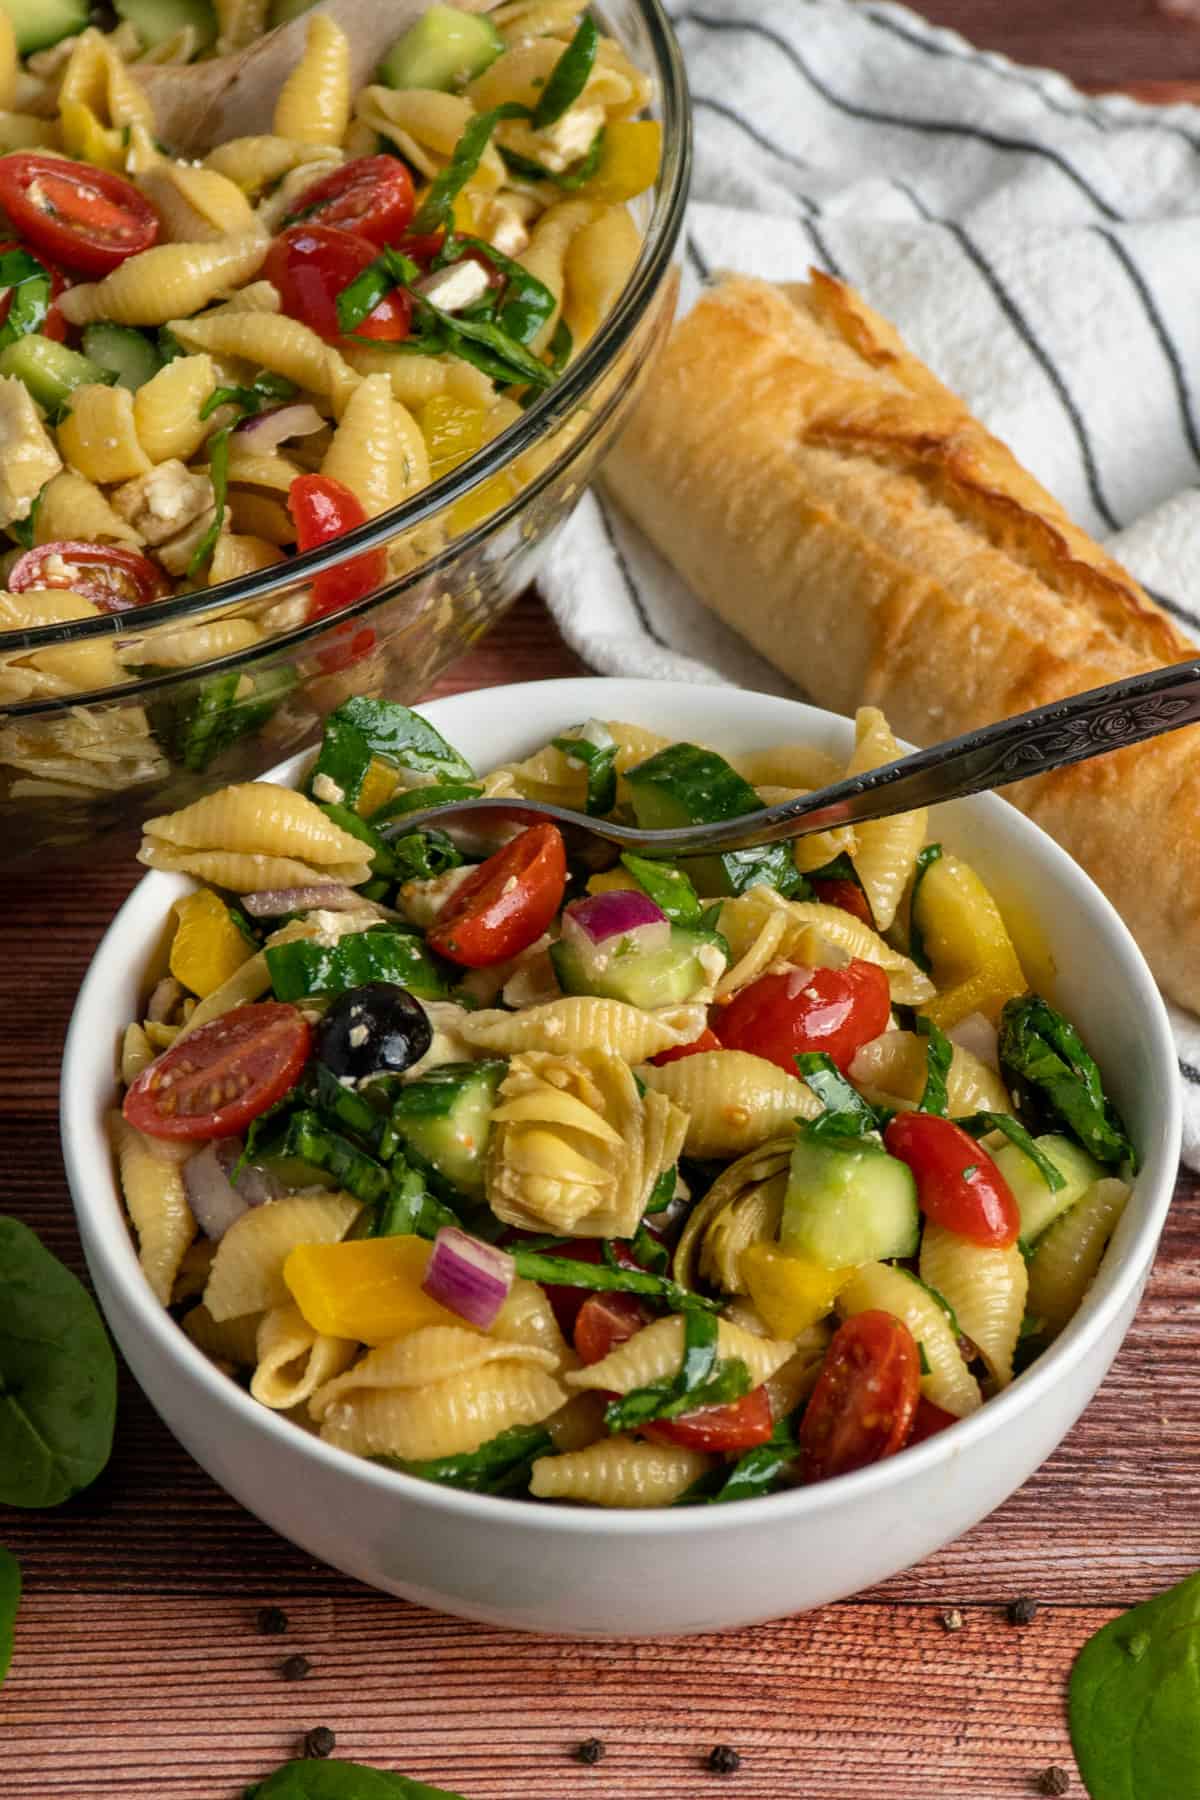 Veggies and pasta in a white bowl with a fork.